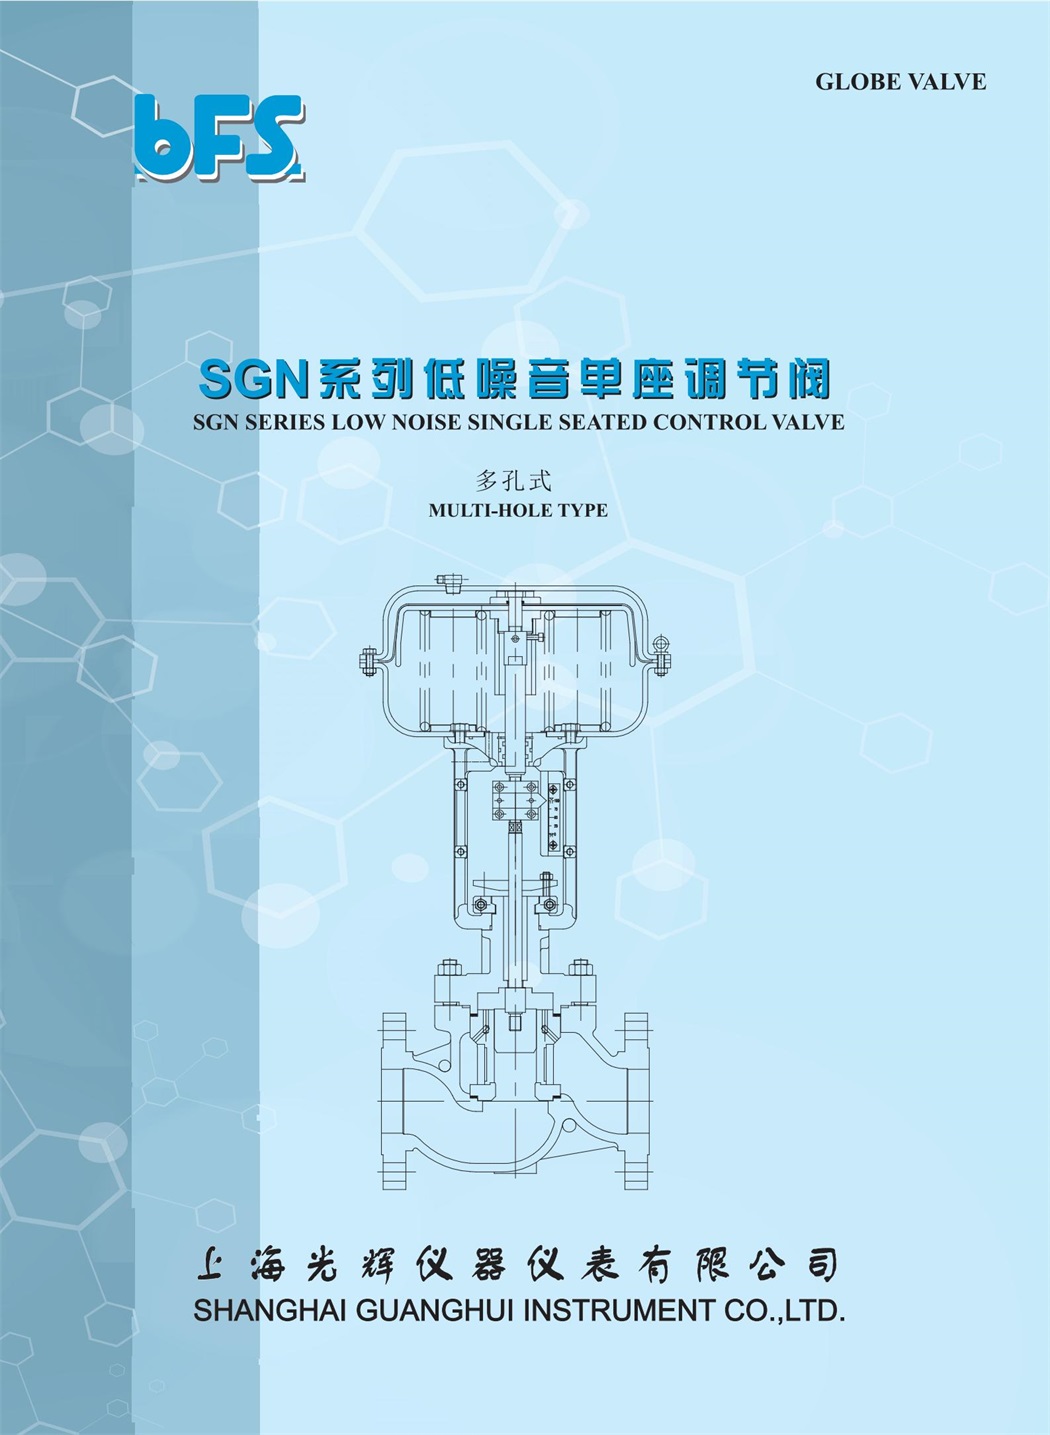 SGN Series Low Noise Single Seated Control Valve